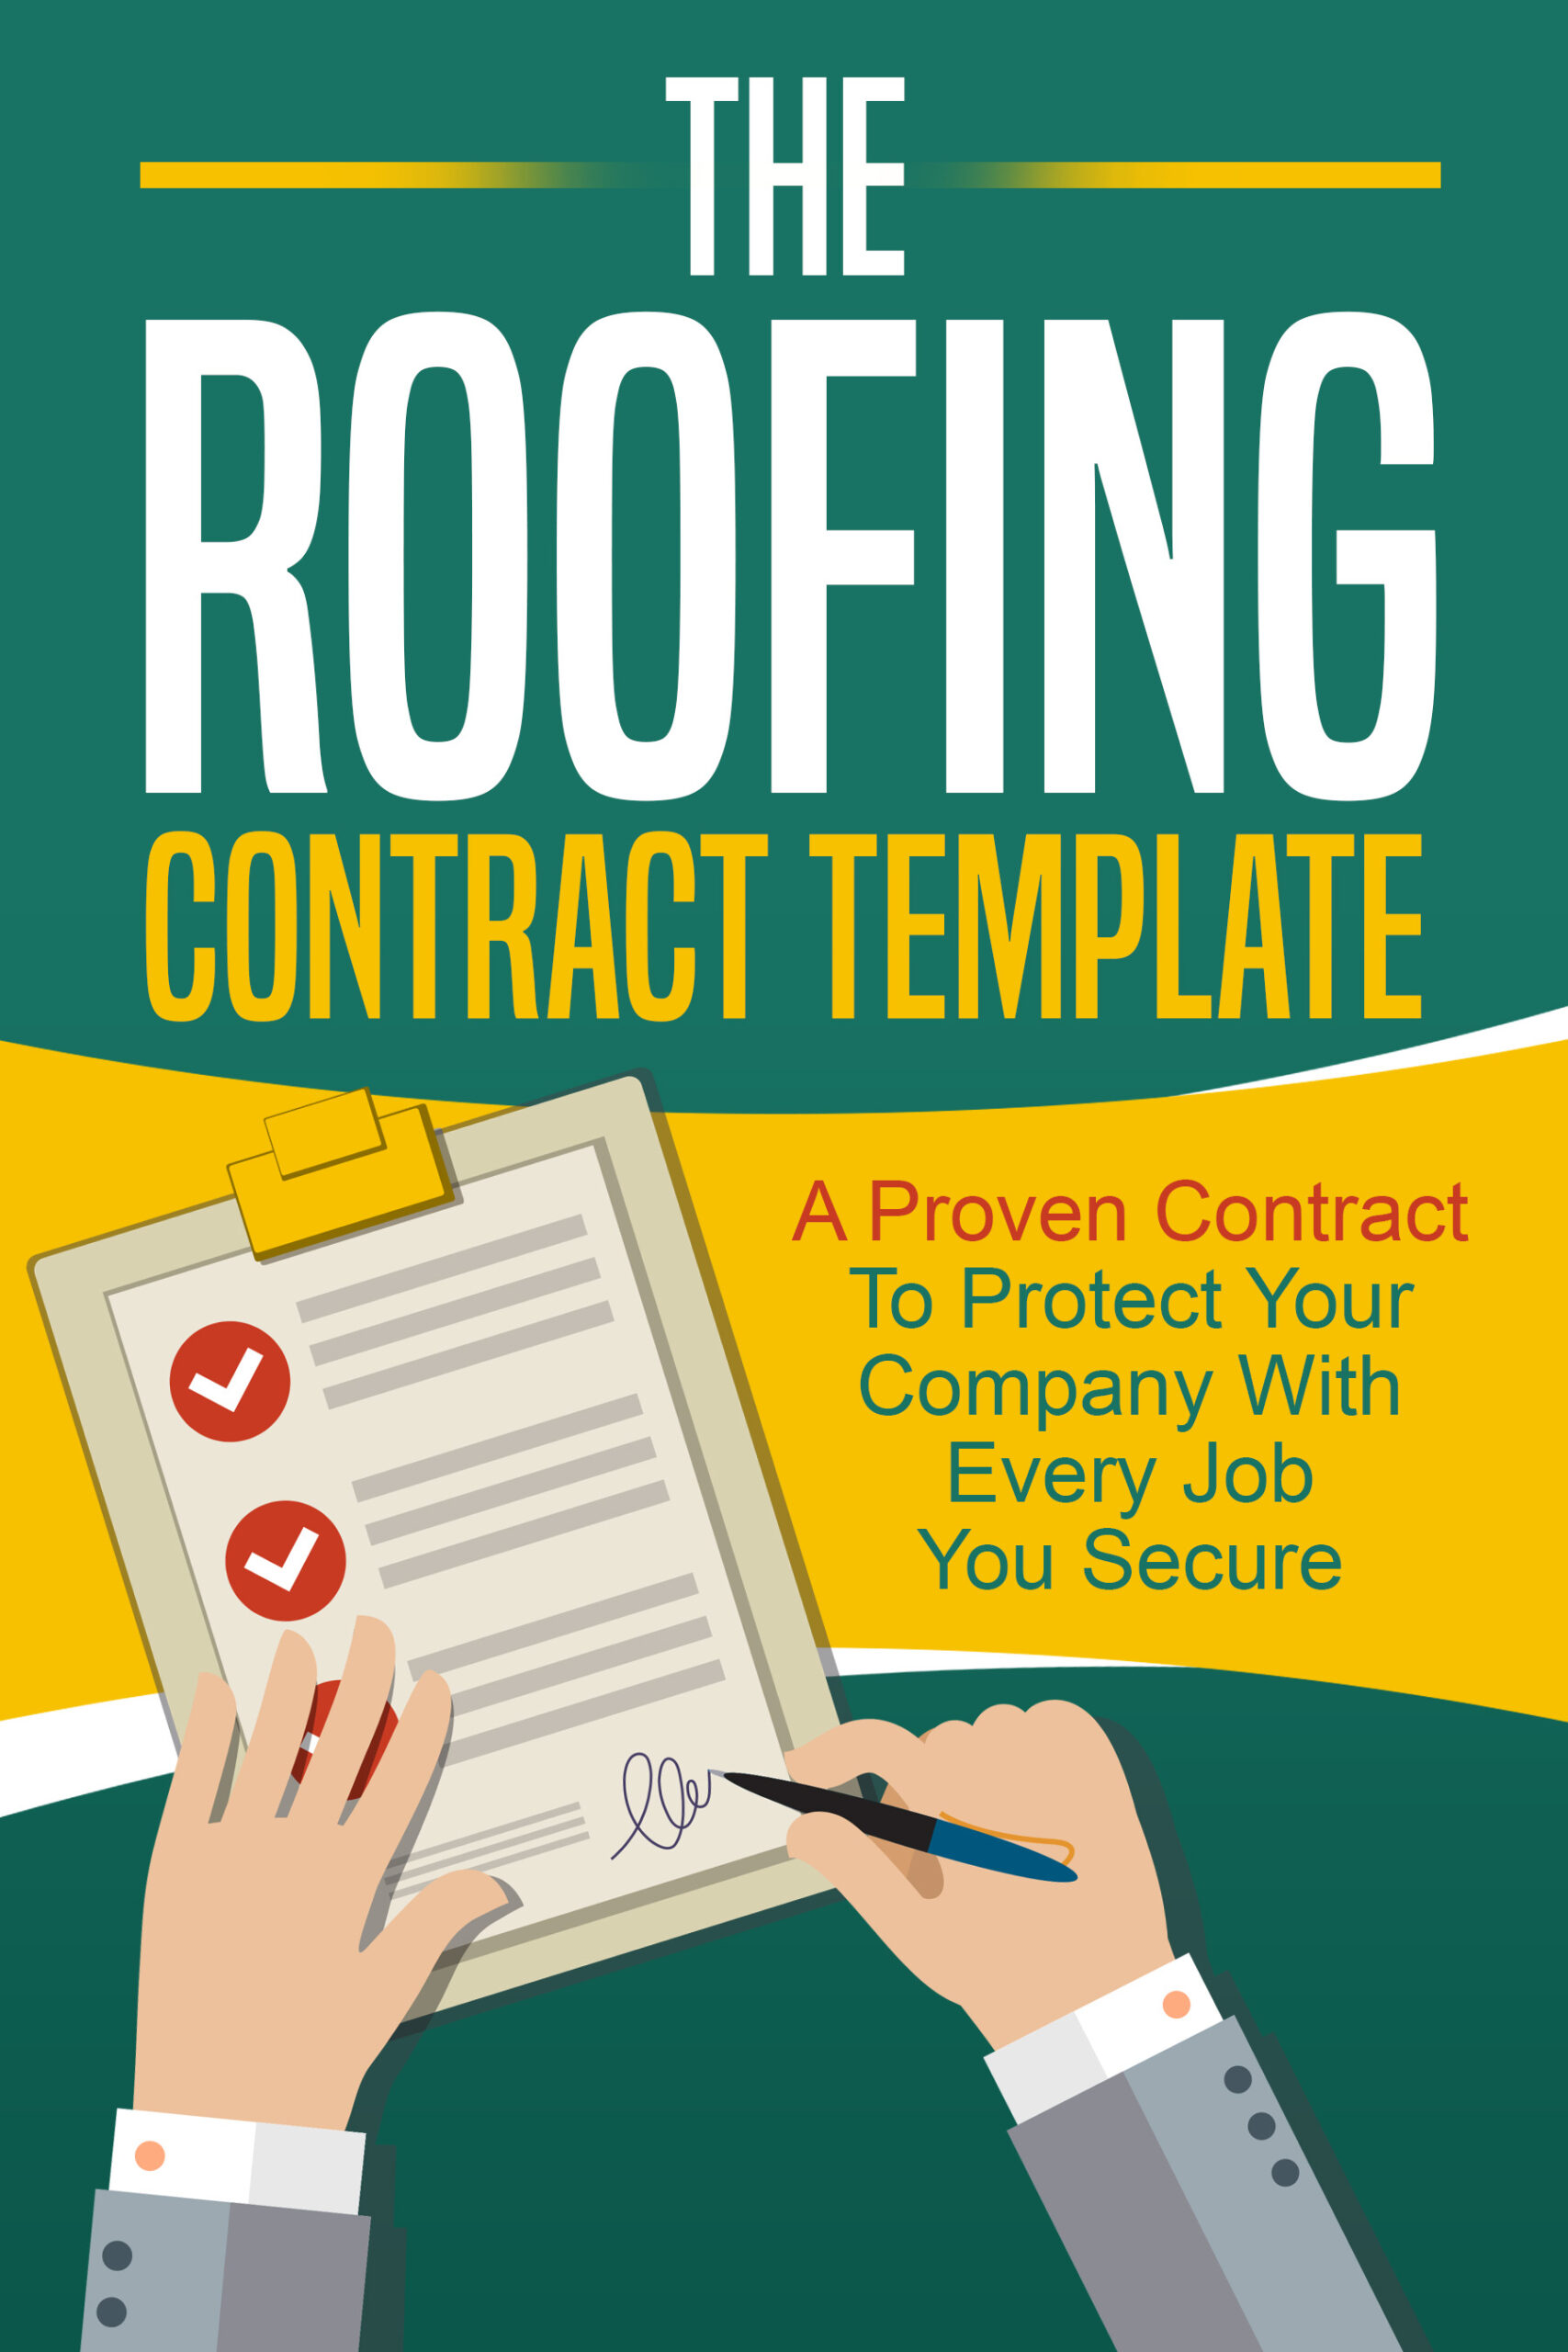 grab-the-roofing-contract-template-customize-it-and-put-it-to-work